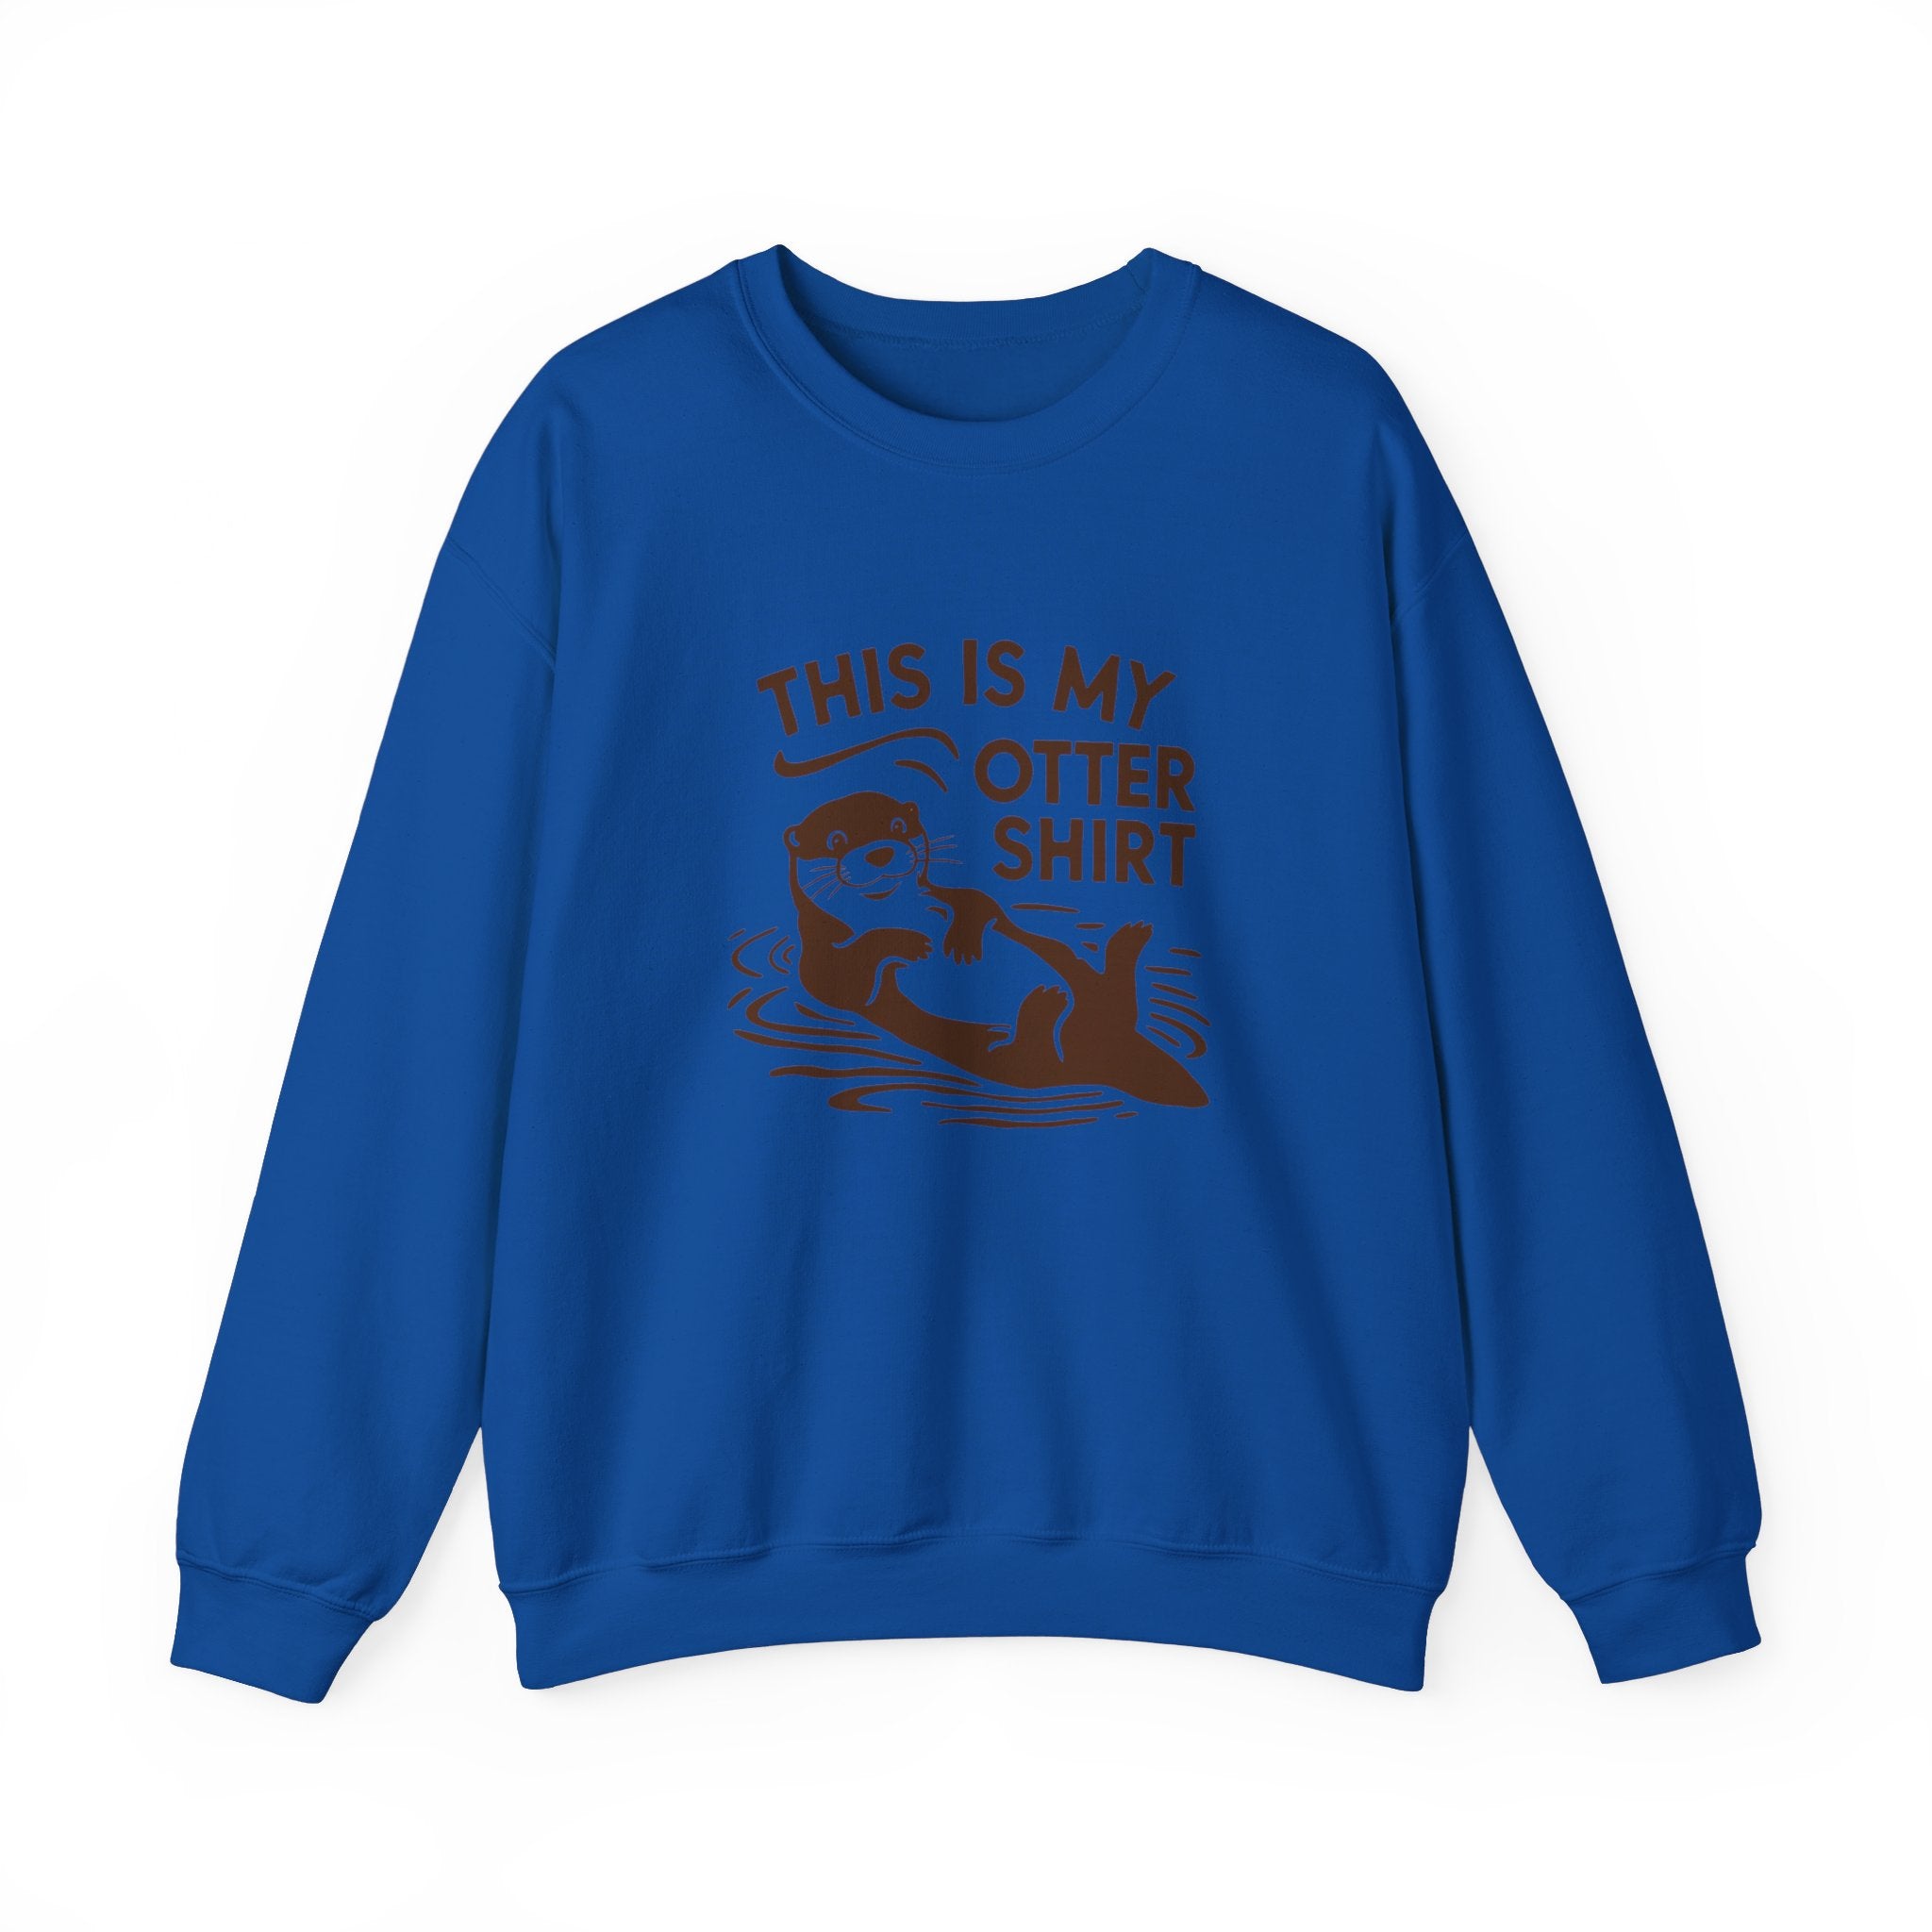 A stylish blue My Otter Shirt - Sweatshirt featuring a warm illustration of an otter and the text "THIS IS MY OTTER SHIRT" printed above it.